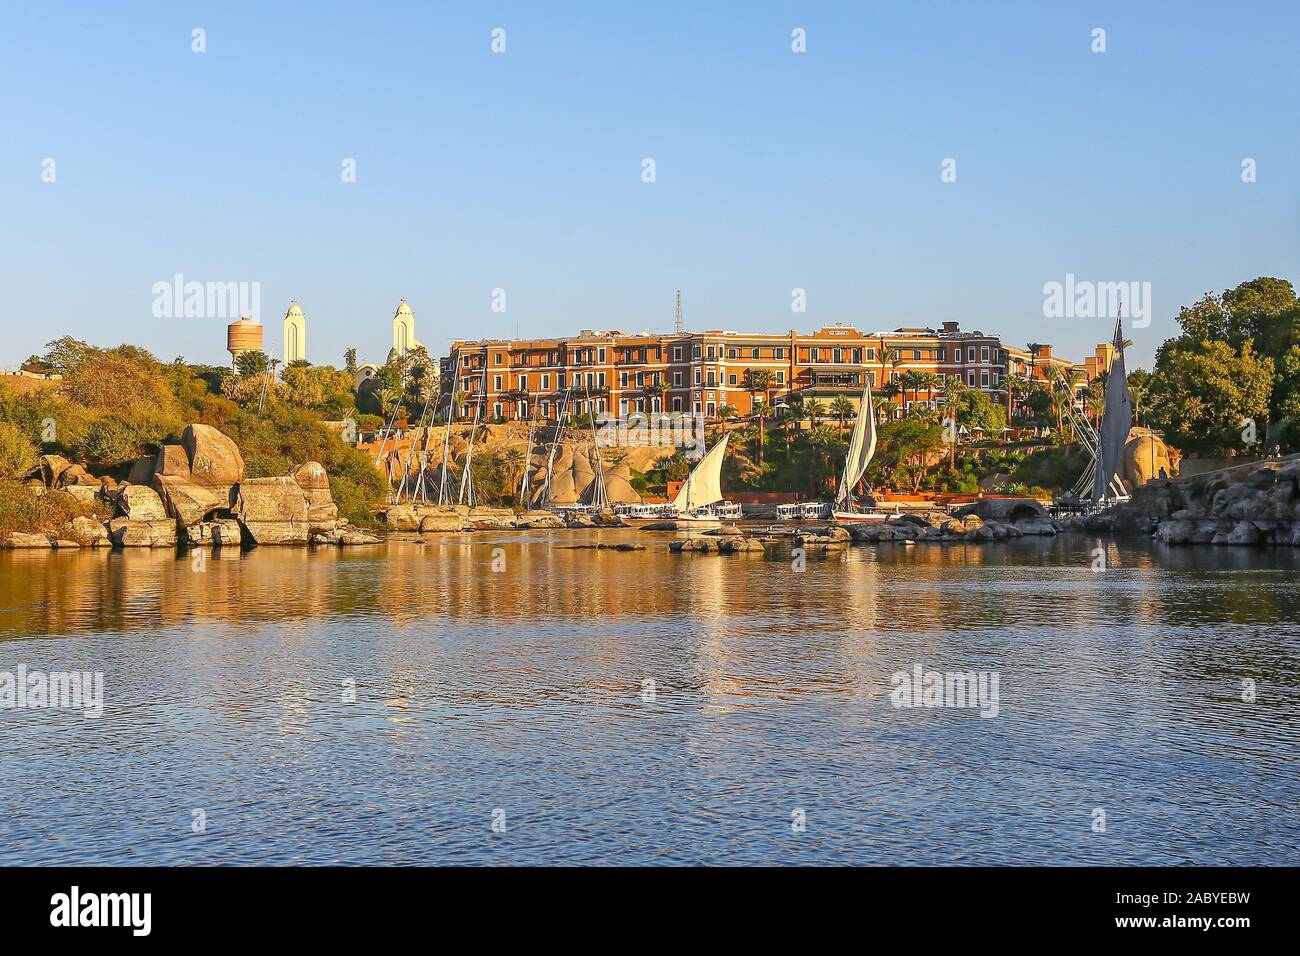 The Old Cataract Hotel, a historic British colonial-era 5-star luxury resort hotel located on the banks of the River Nile in Aswan, Egypt, Africa Stock Photo